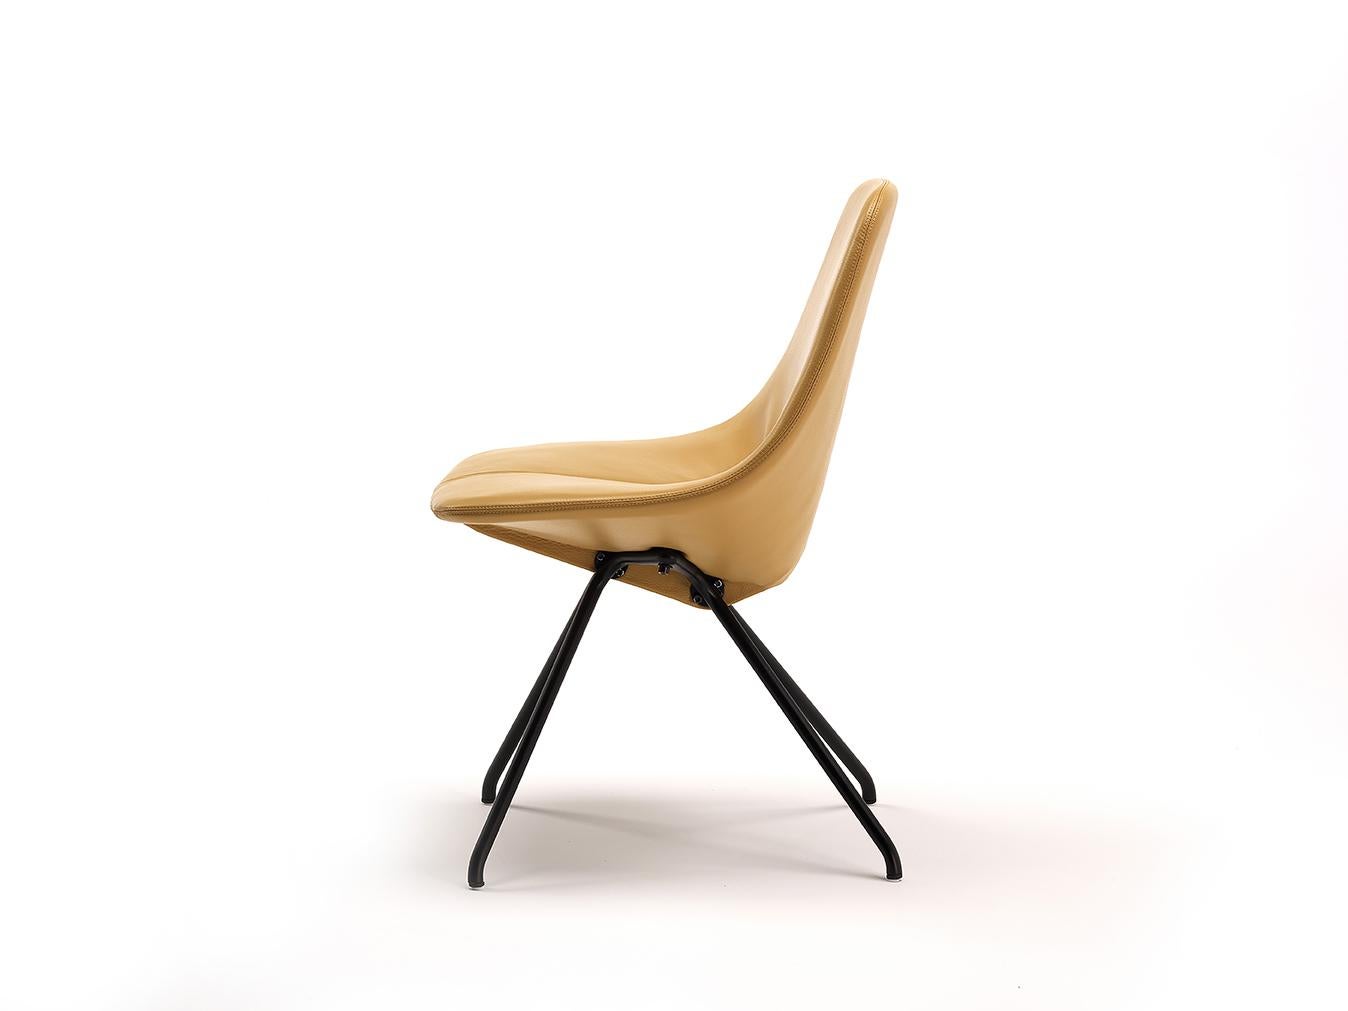 Designed in 1953, the DU 30 is without doubt Gastone Rinaldi’s most famous design. The unitary nature of the seat and backrest results in a central cutting and stitching eff ect that brings to mind the contemporary works by Lucio Fontana.